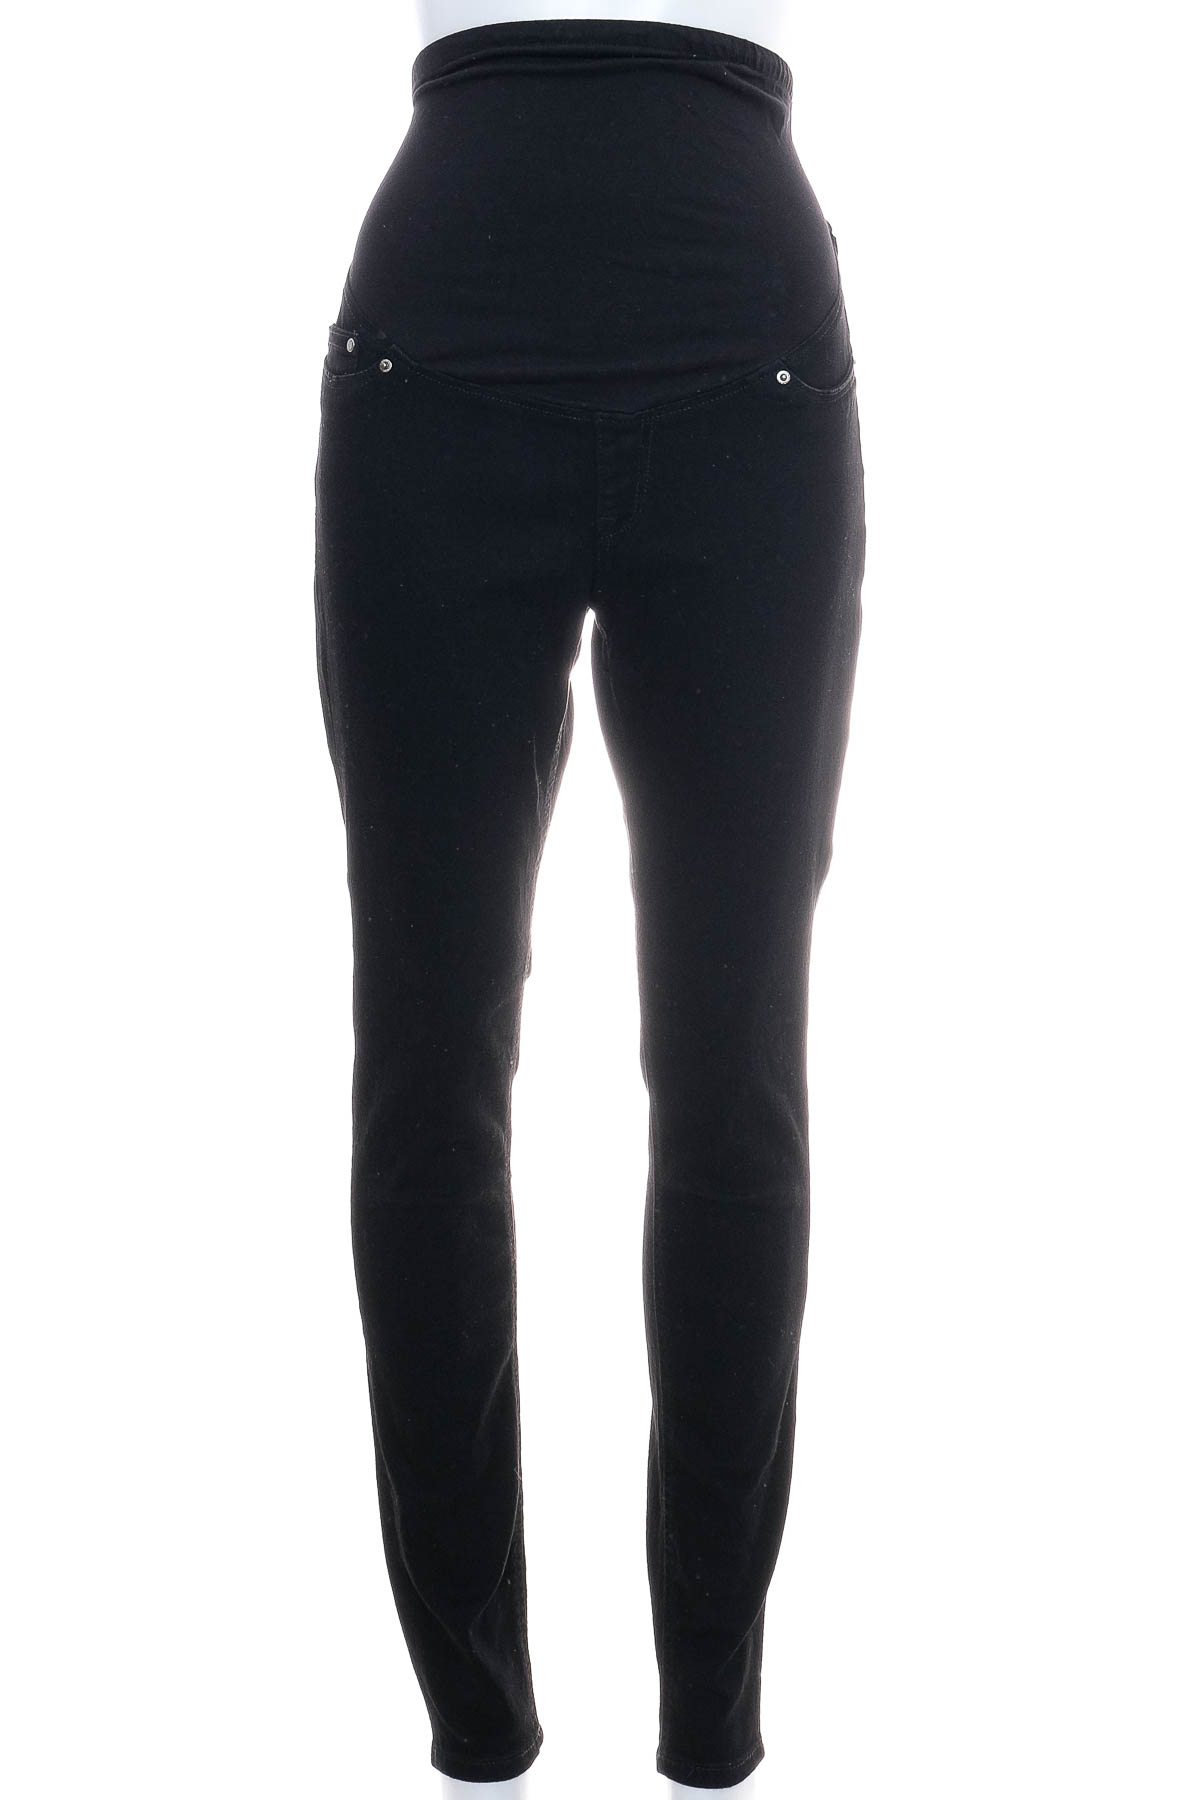 Women's jeans for pregnant women - H&M MAMA - 0